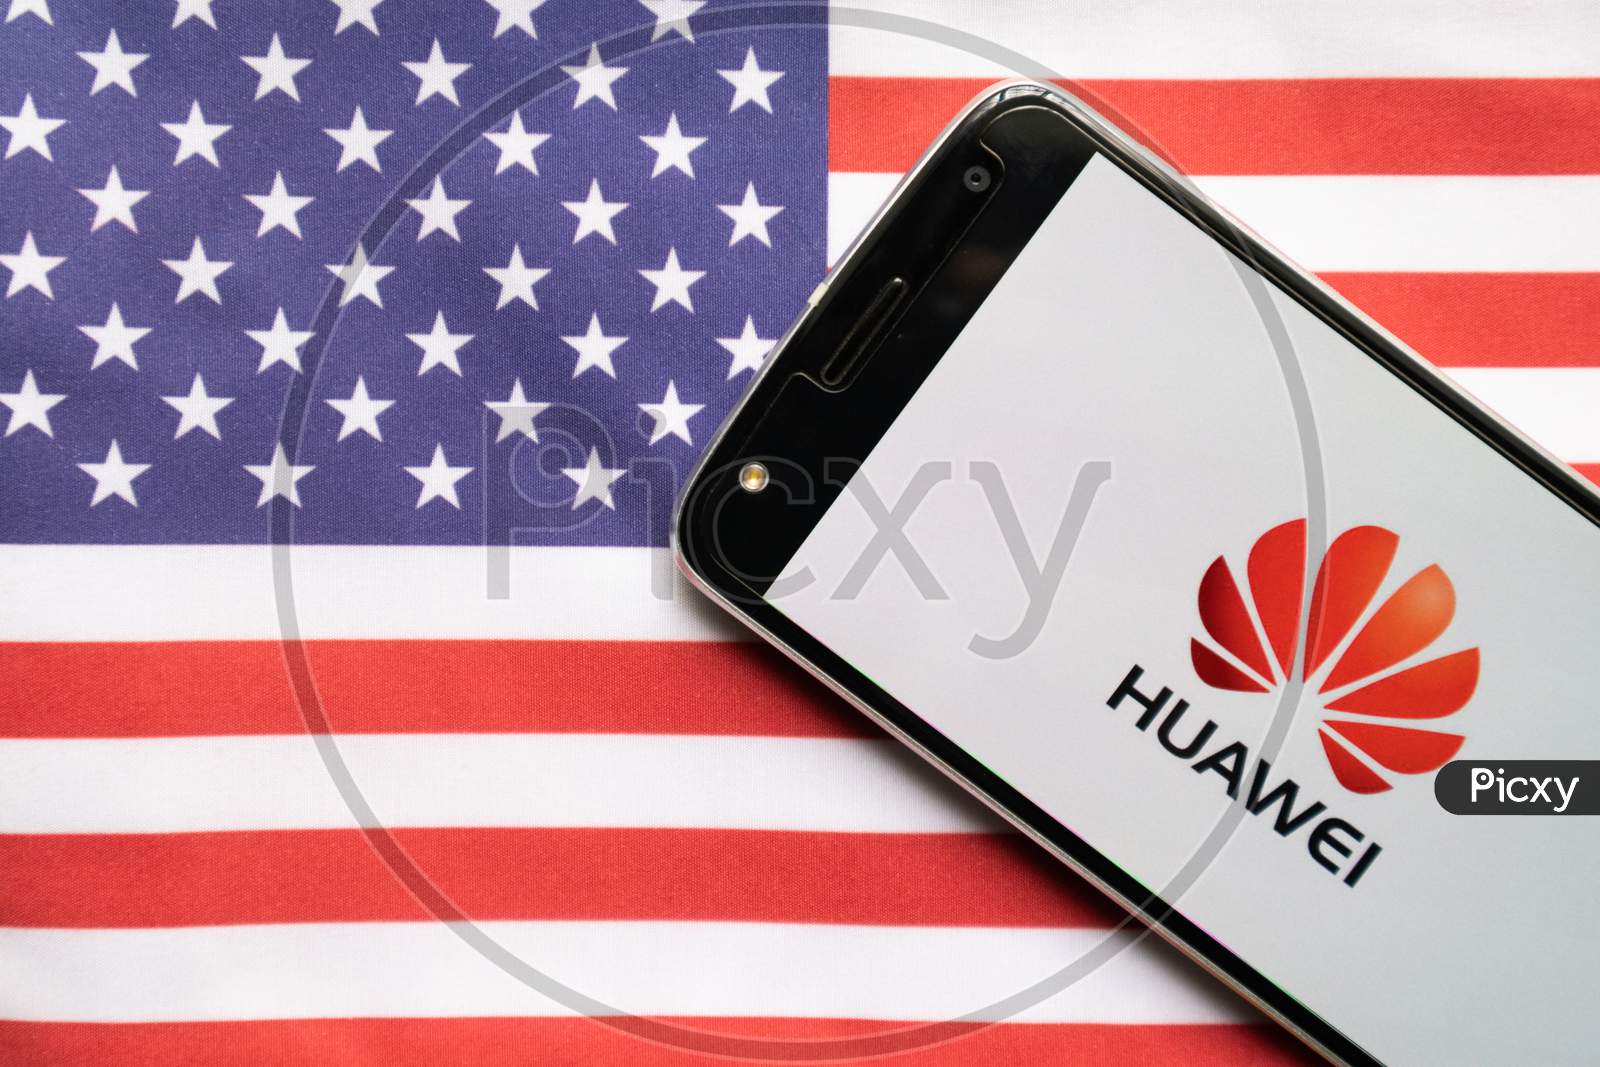 Huawei Logo On Screen Of Mobile On Us Flag